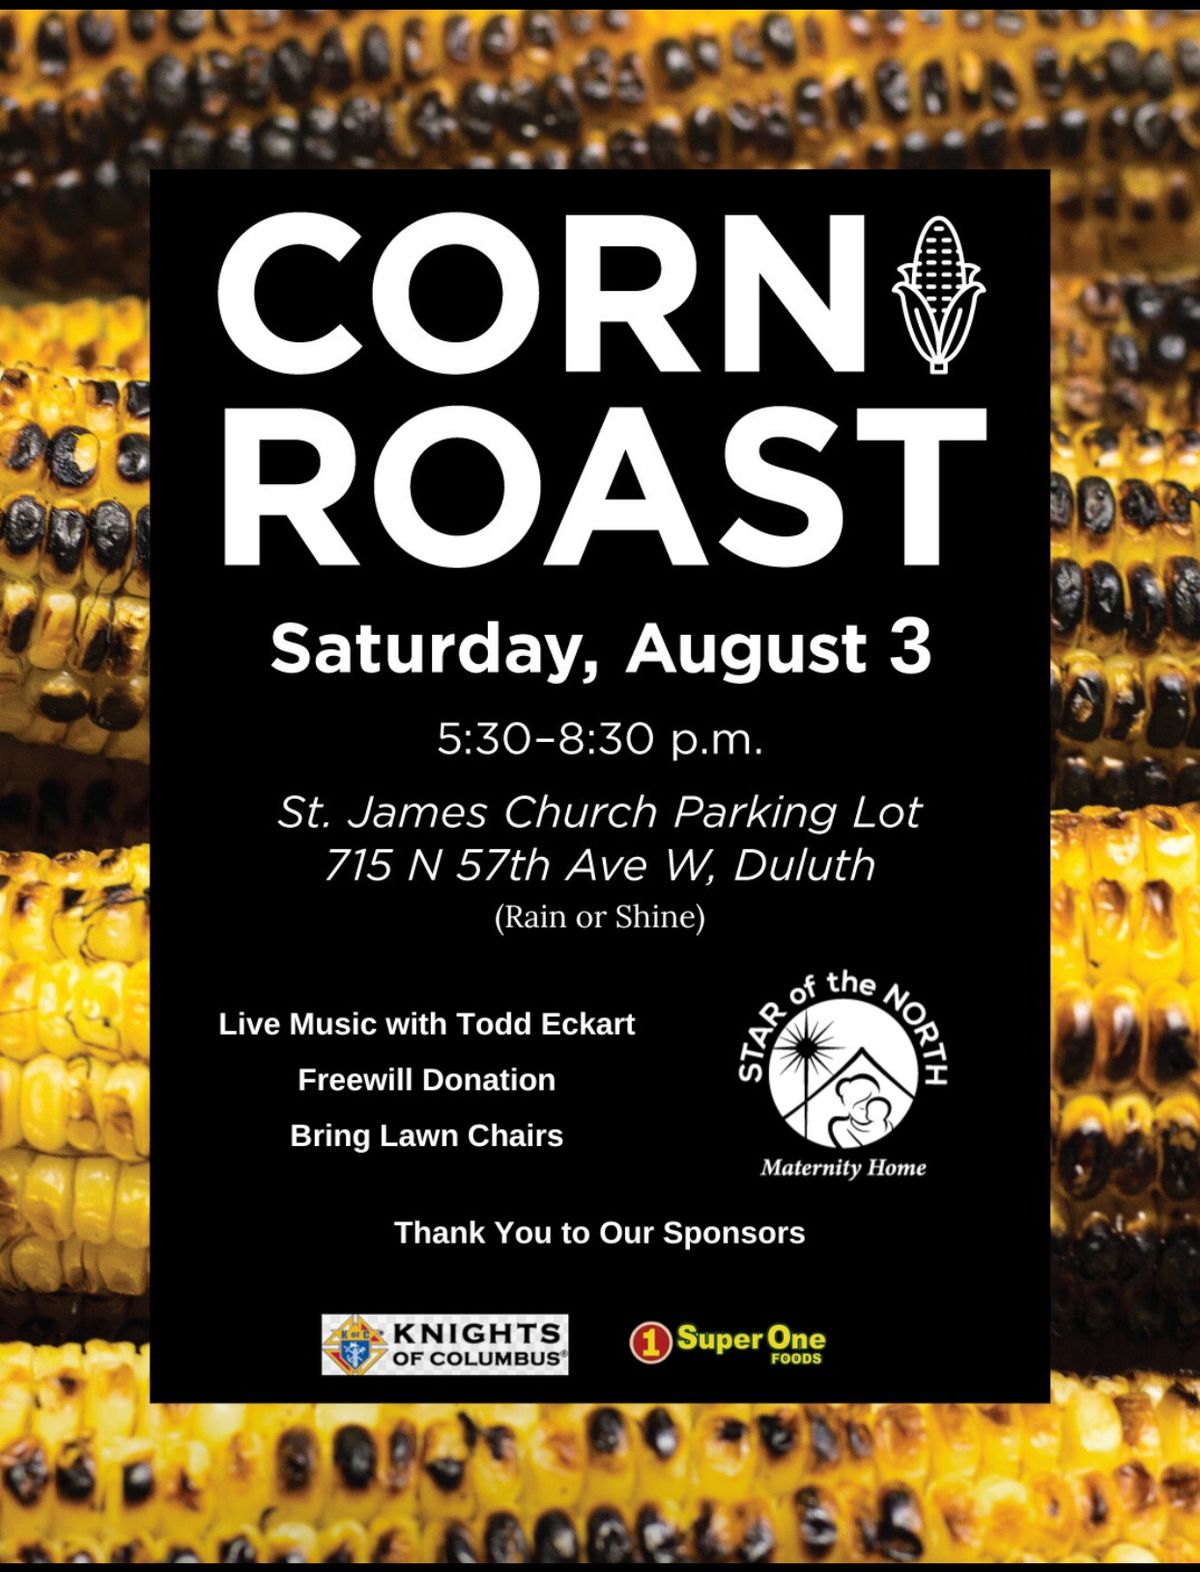 Corn Roast for Star of the North